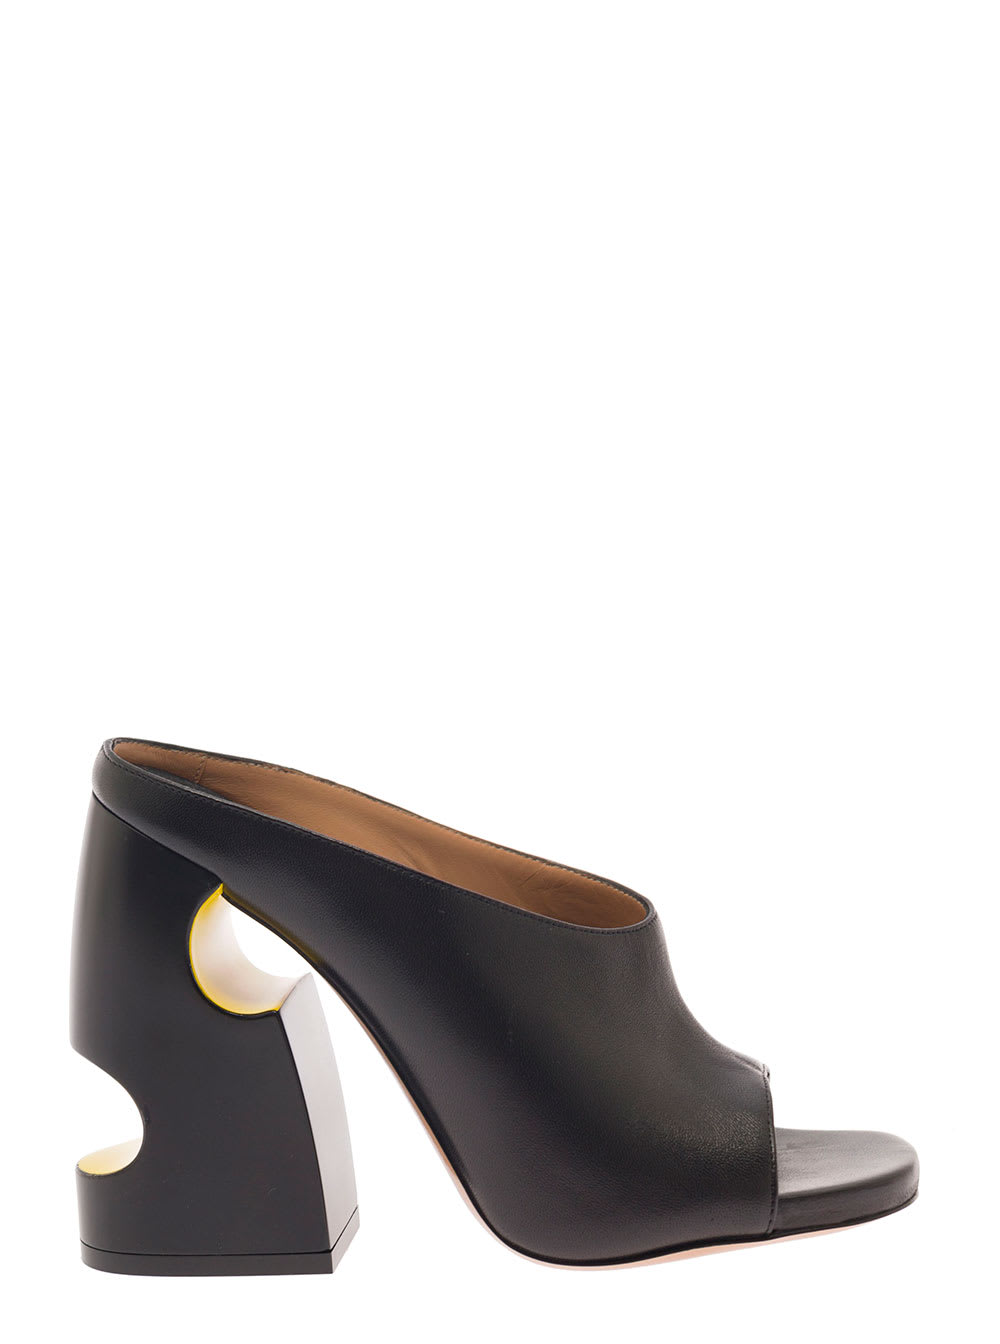 OFF-WHITE POP METEOR MULES IN BLACK LEATHER WOMAN